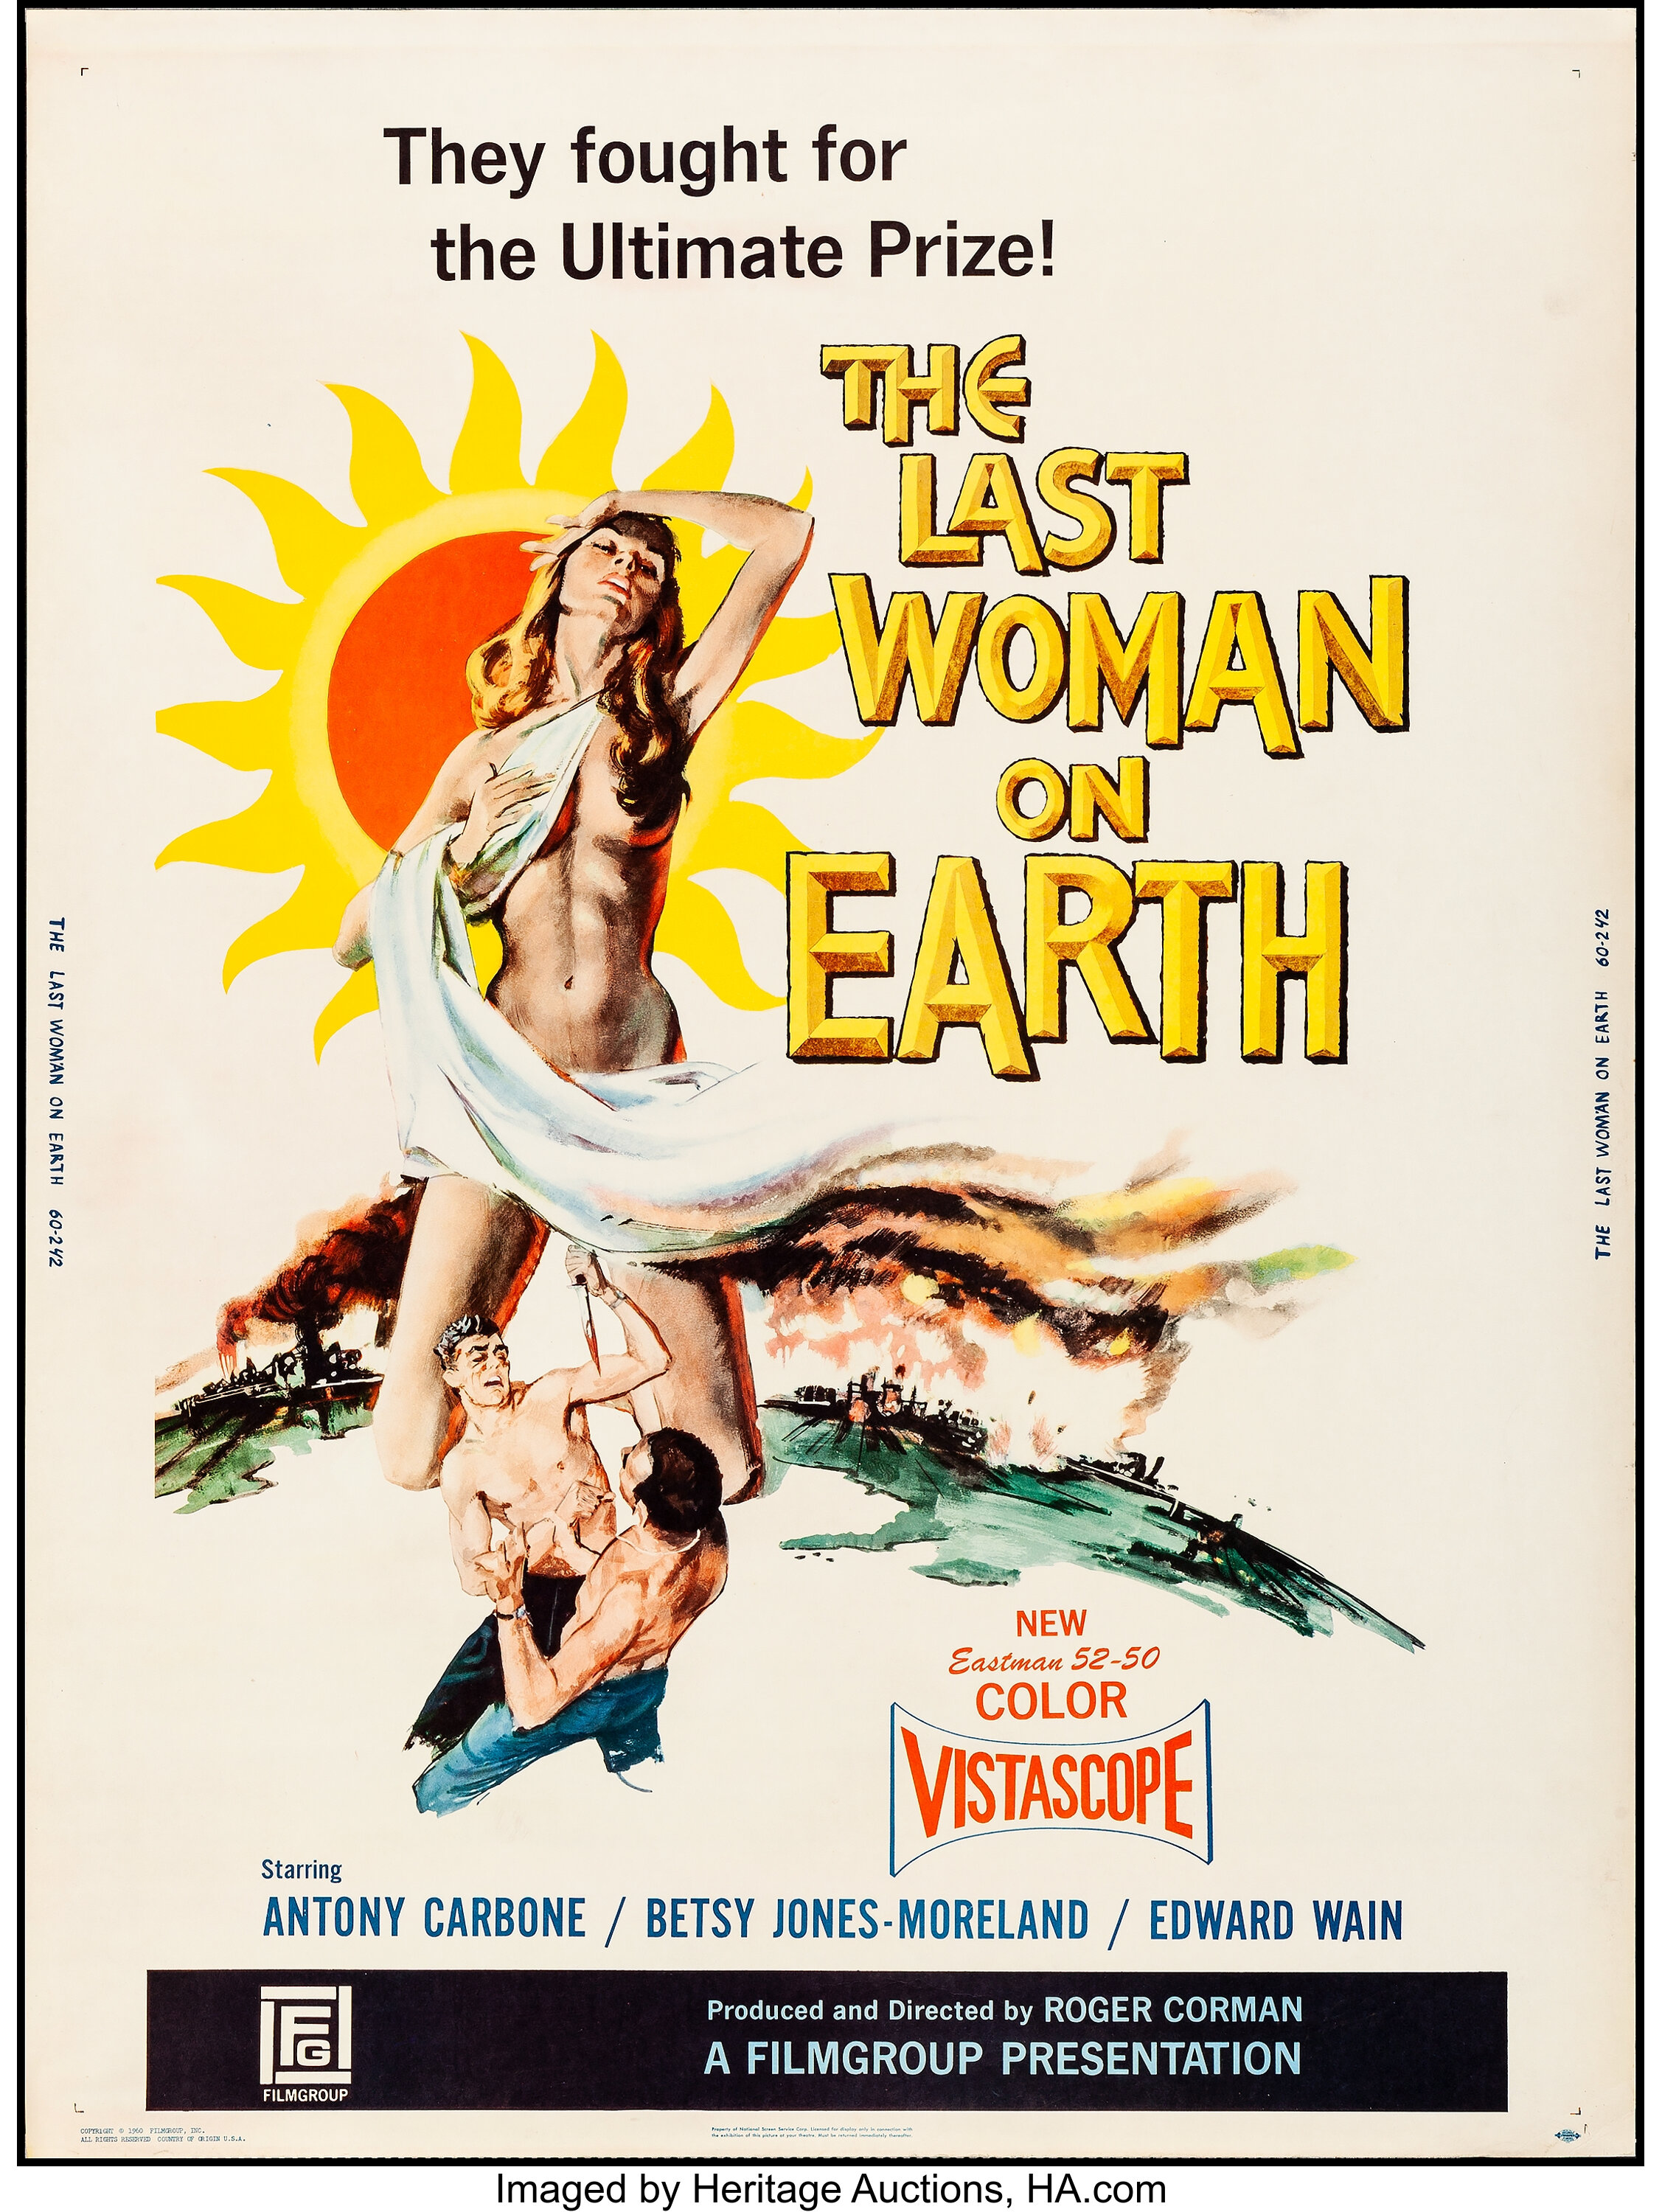 The Last Woman on Earth (Flimgroup, 1960). Poster (30